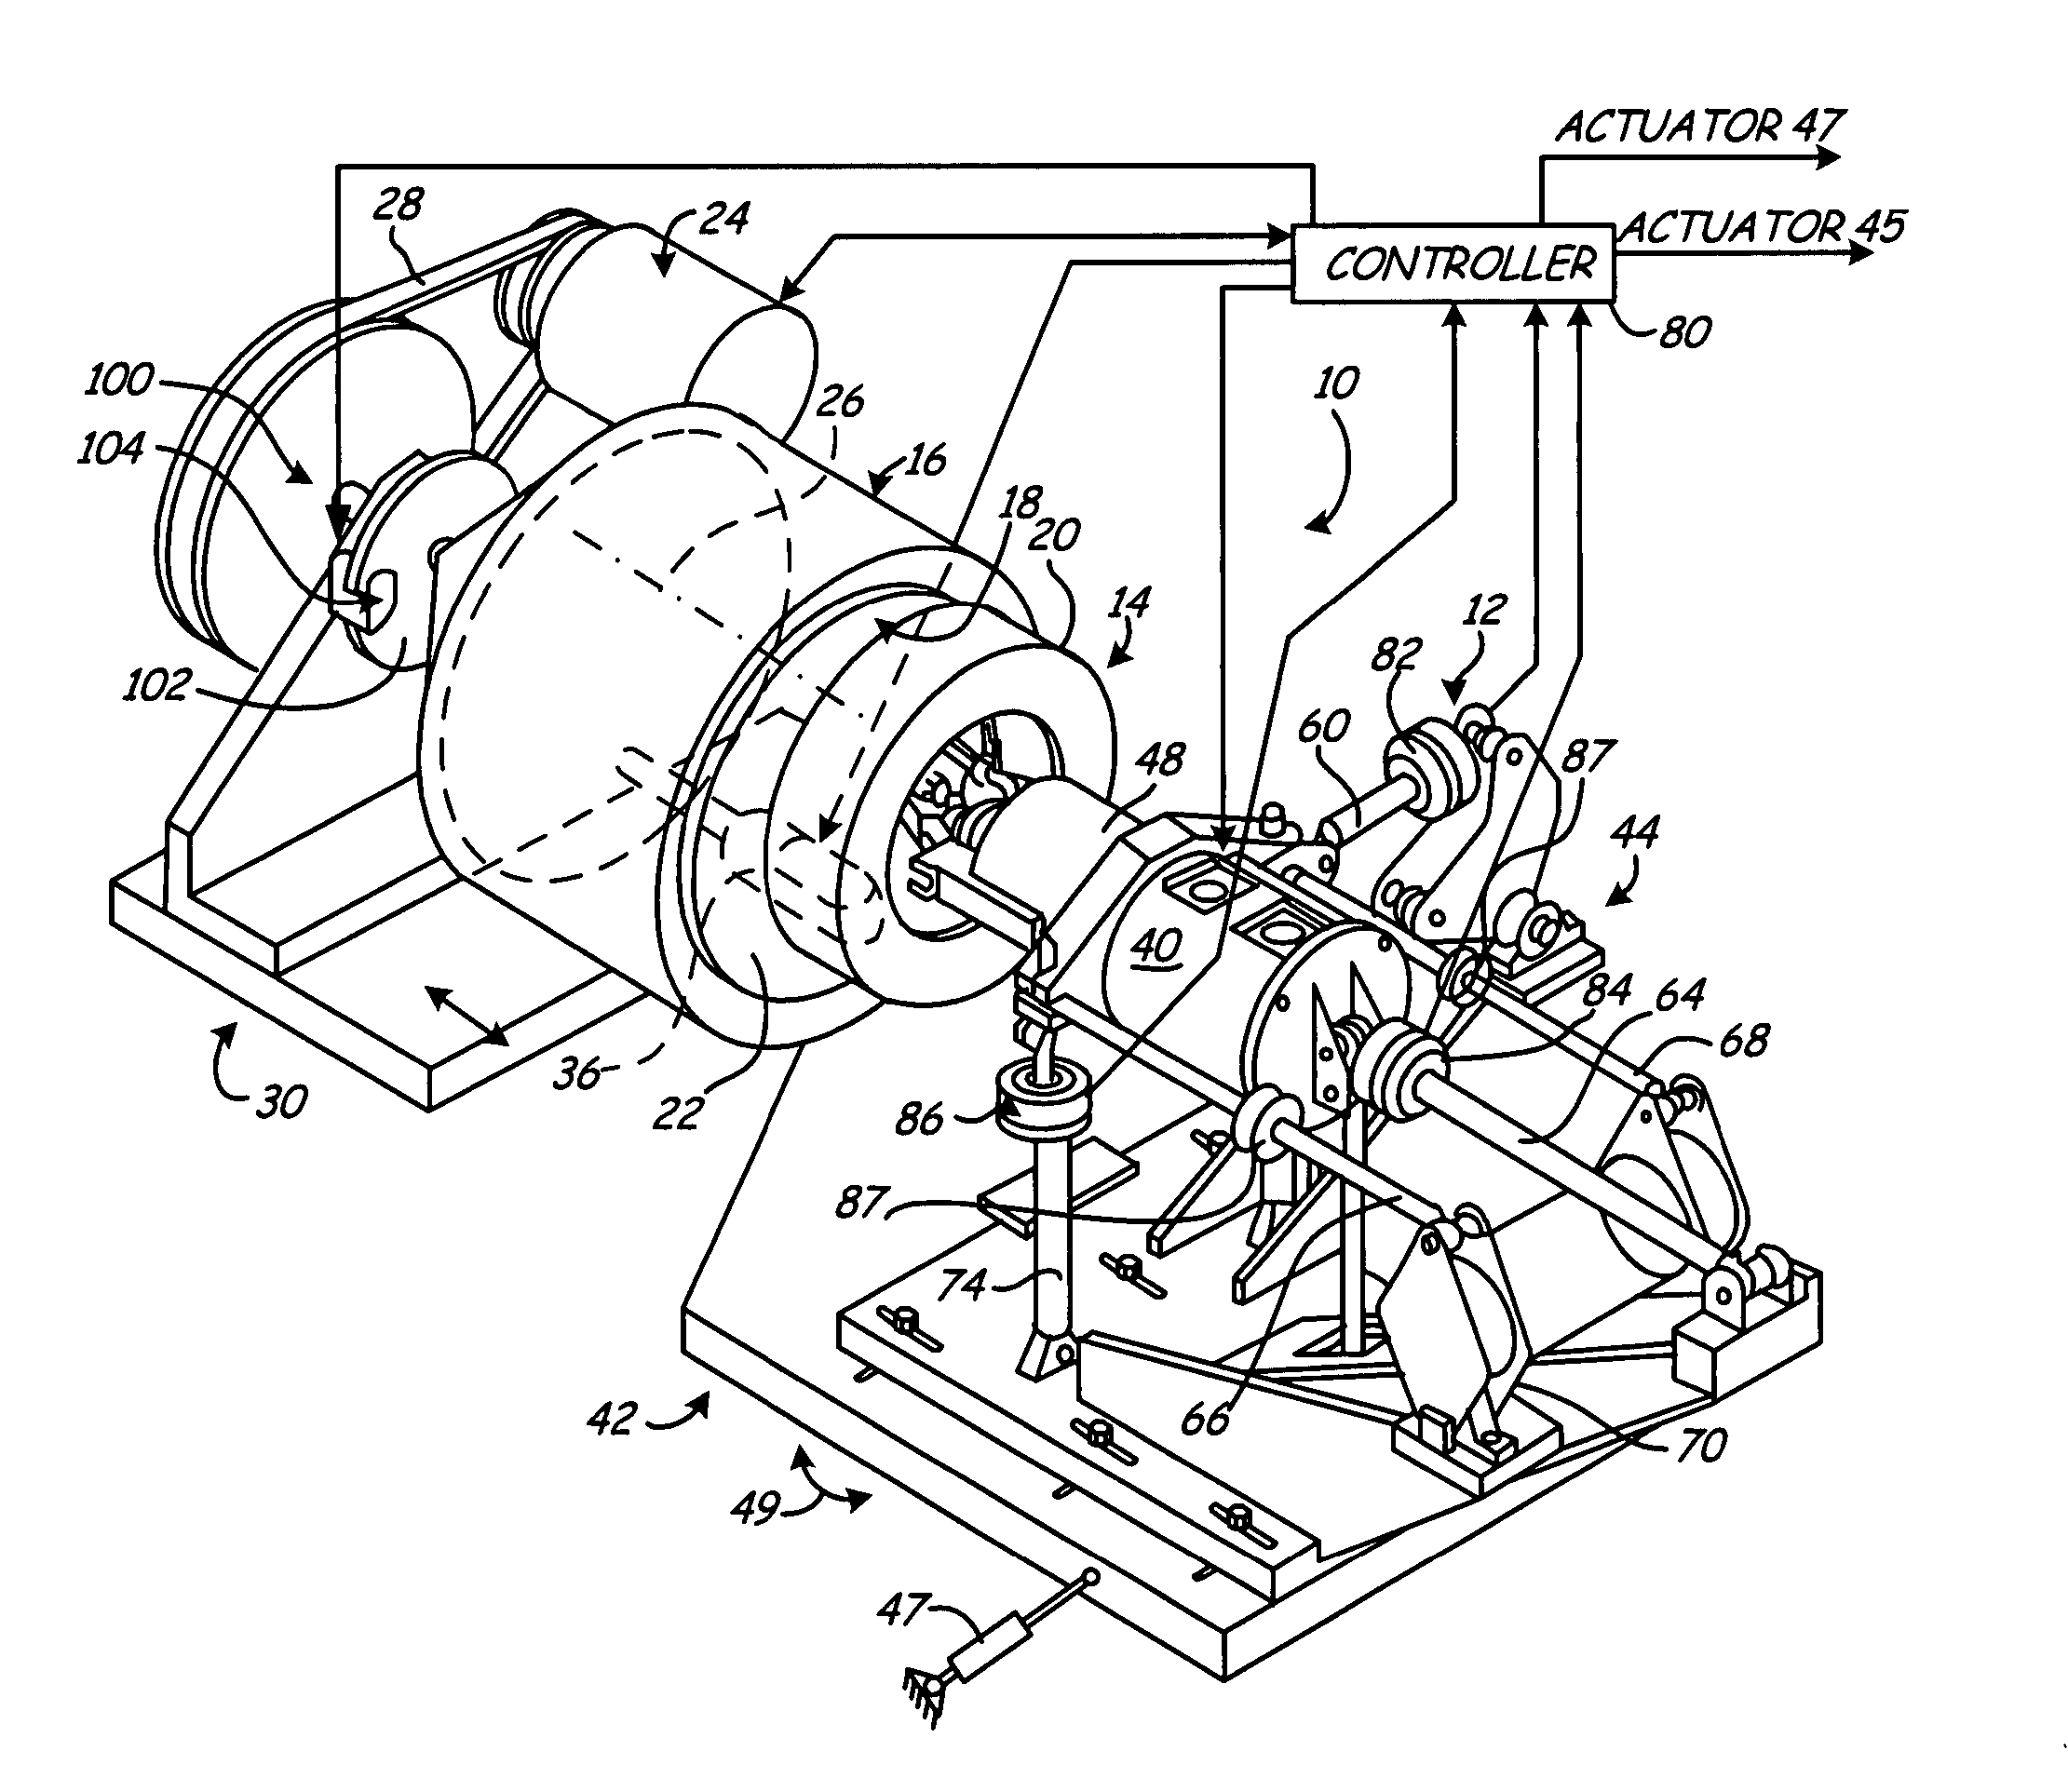 Control methodology for a multi-axial wheel fatigue system